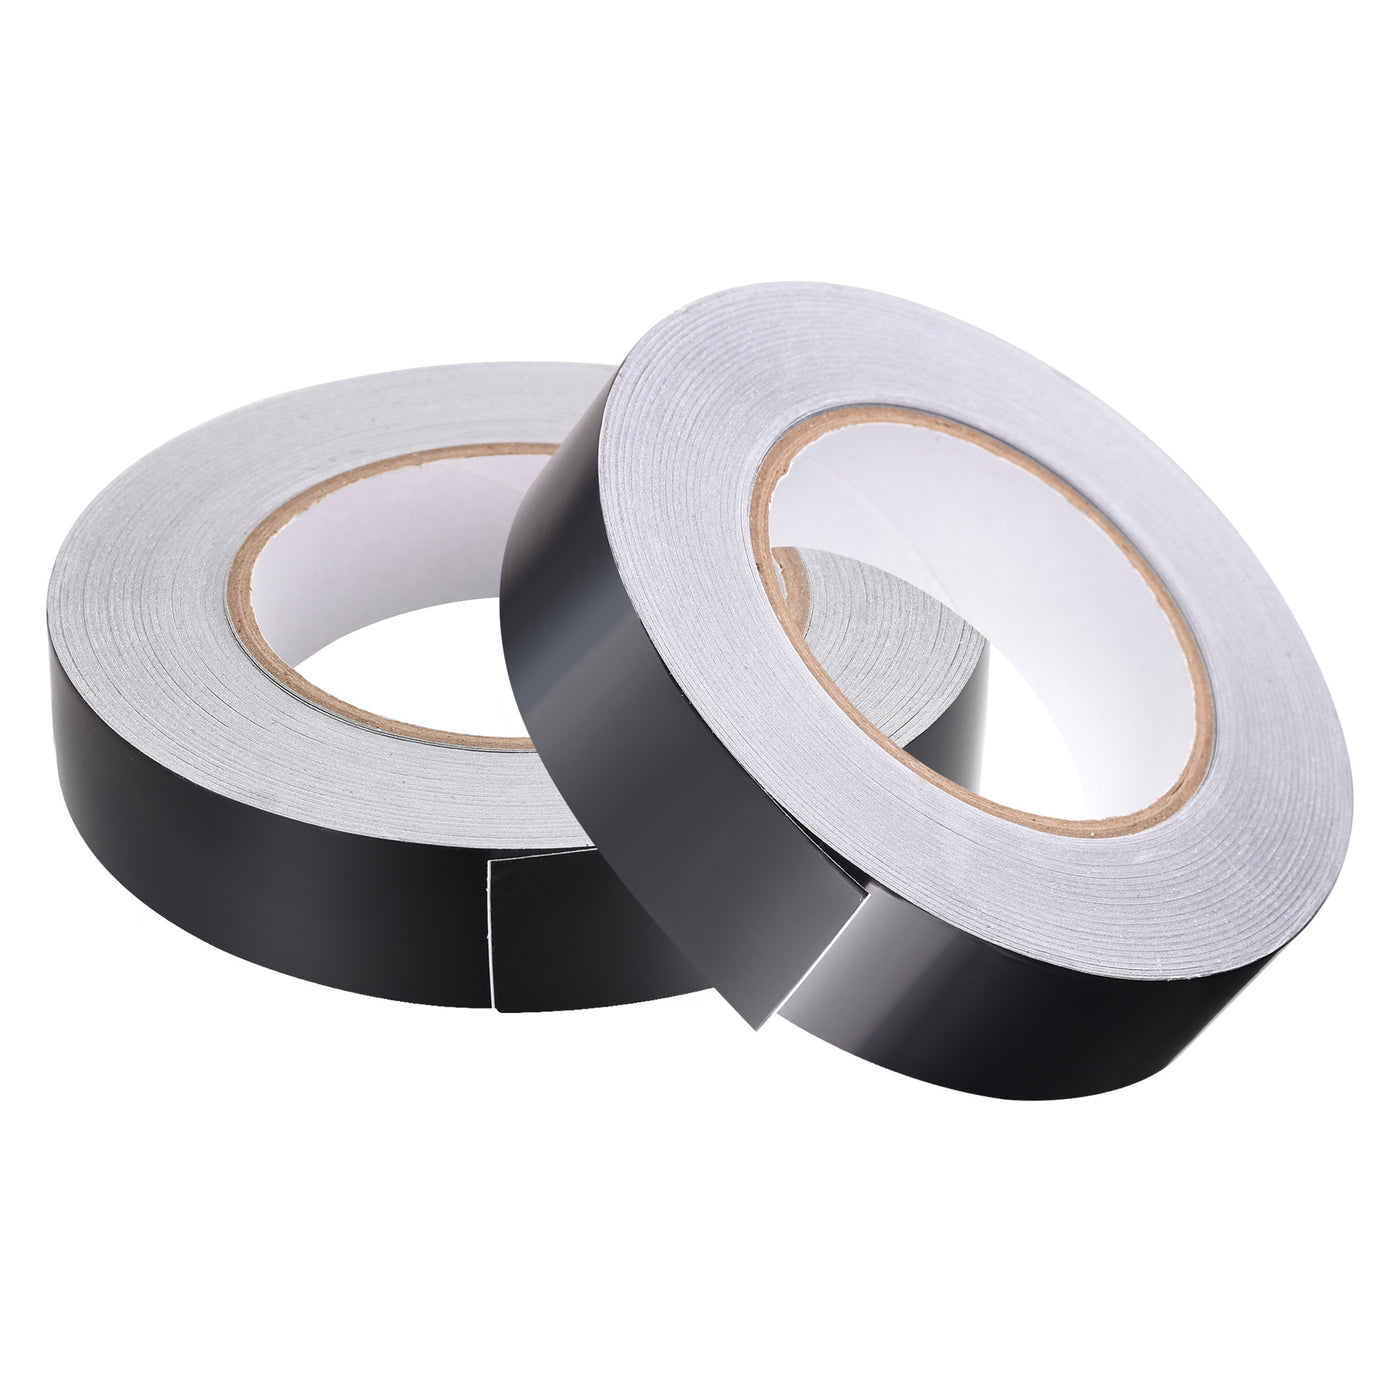 uxcell Uxcell 25mm Aluminum Foil Tape for HVAC, Patching Hot and Blocking Light 50m/164ft 2pcs